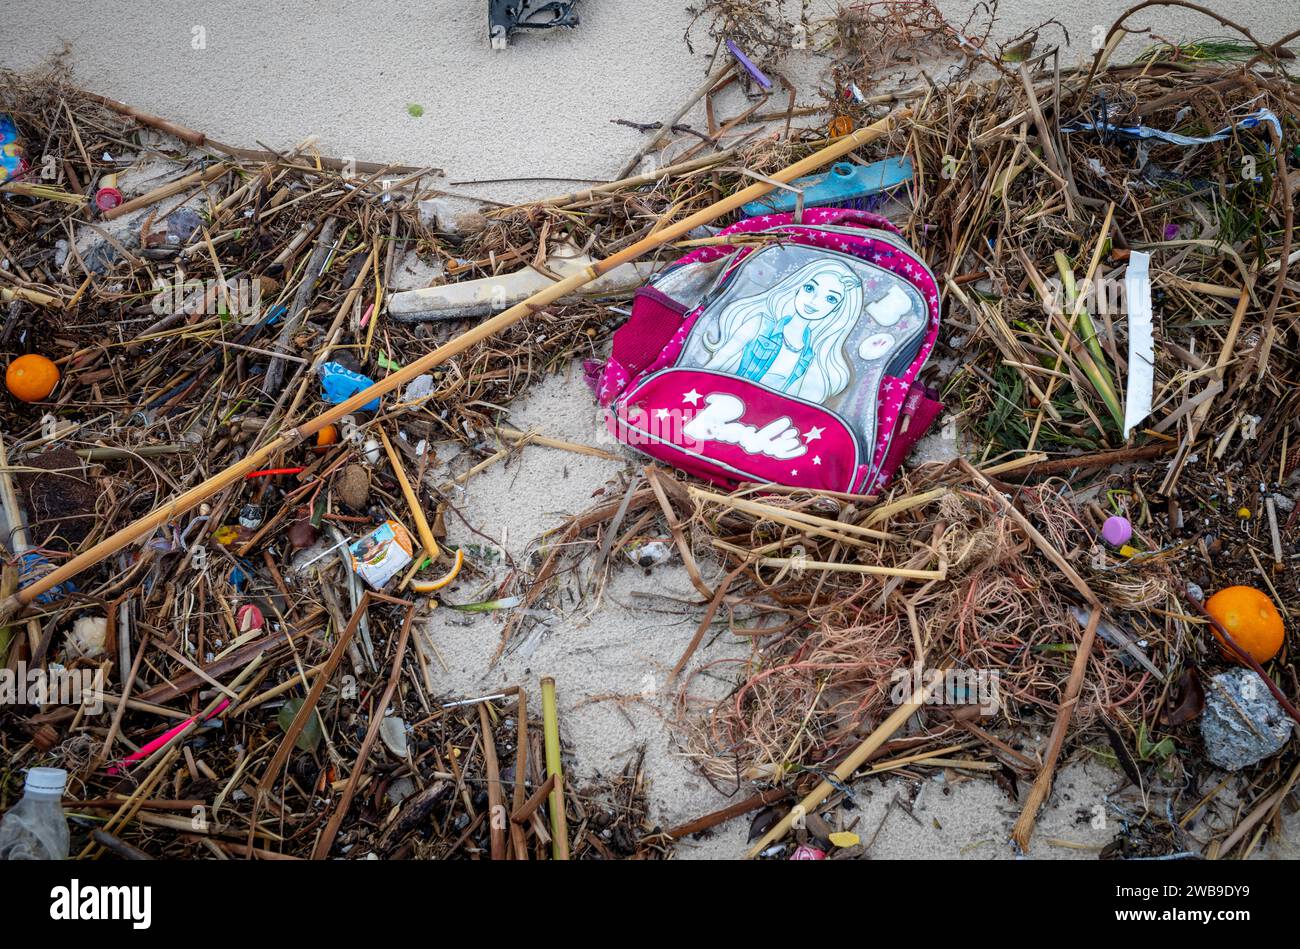 A child's Barbie backpack, plastic waste, fruit and general dead vegetation and debris washed on a sandy beach on the Mediterranean Sea in Tunisia. Stock Photo